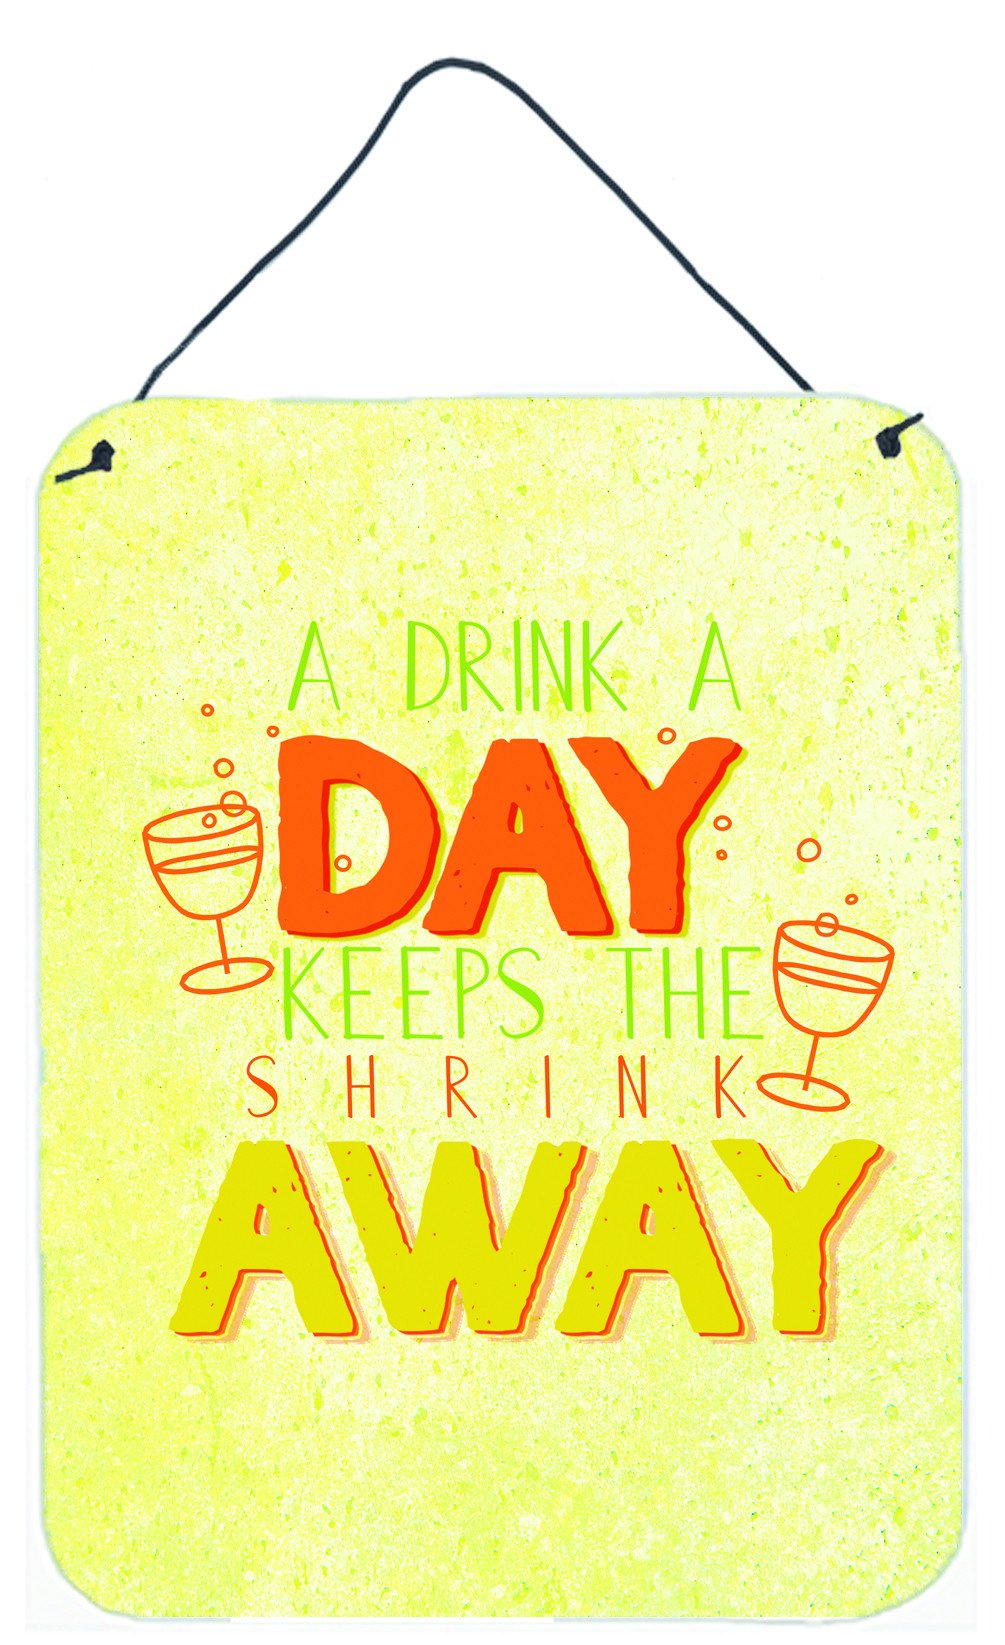 A Drink a Day Wall or Door Hanging Prints BB5422DS1216 by Caroline's Treasures